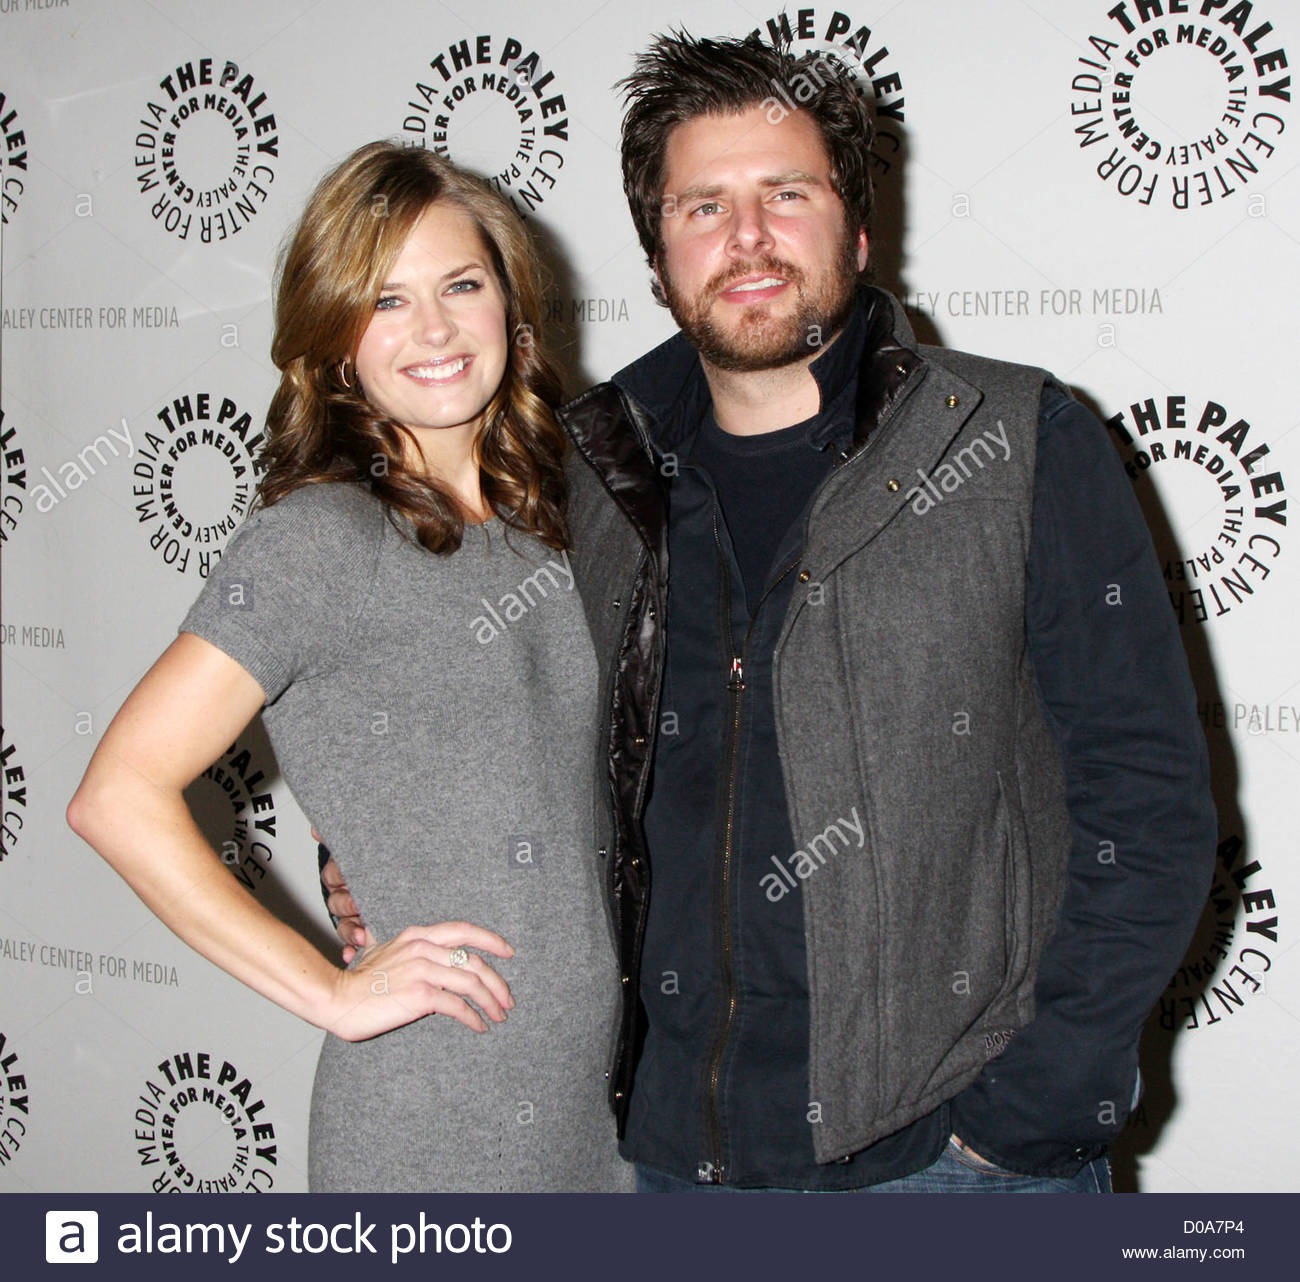  Alamy Maggie Lawson and James Roday "Psych